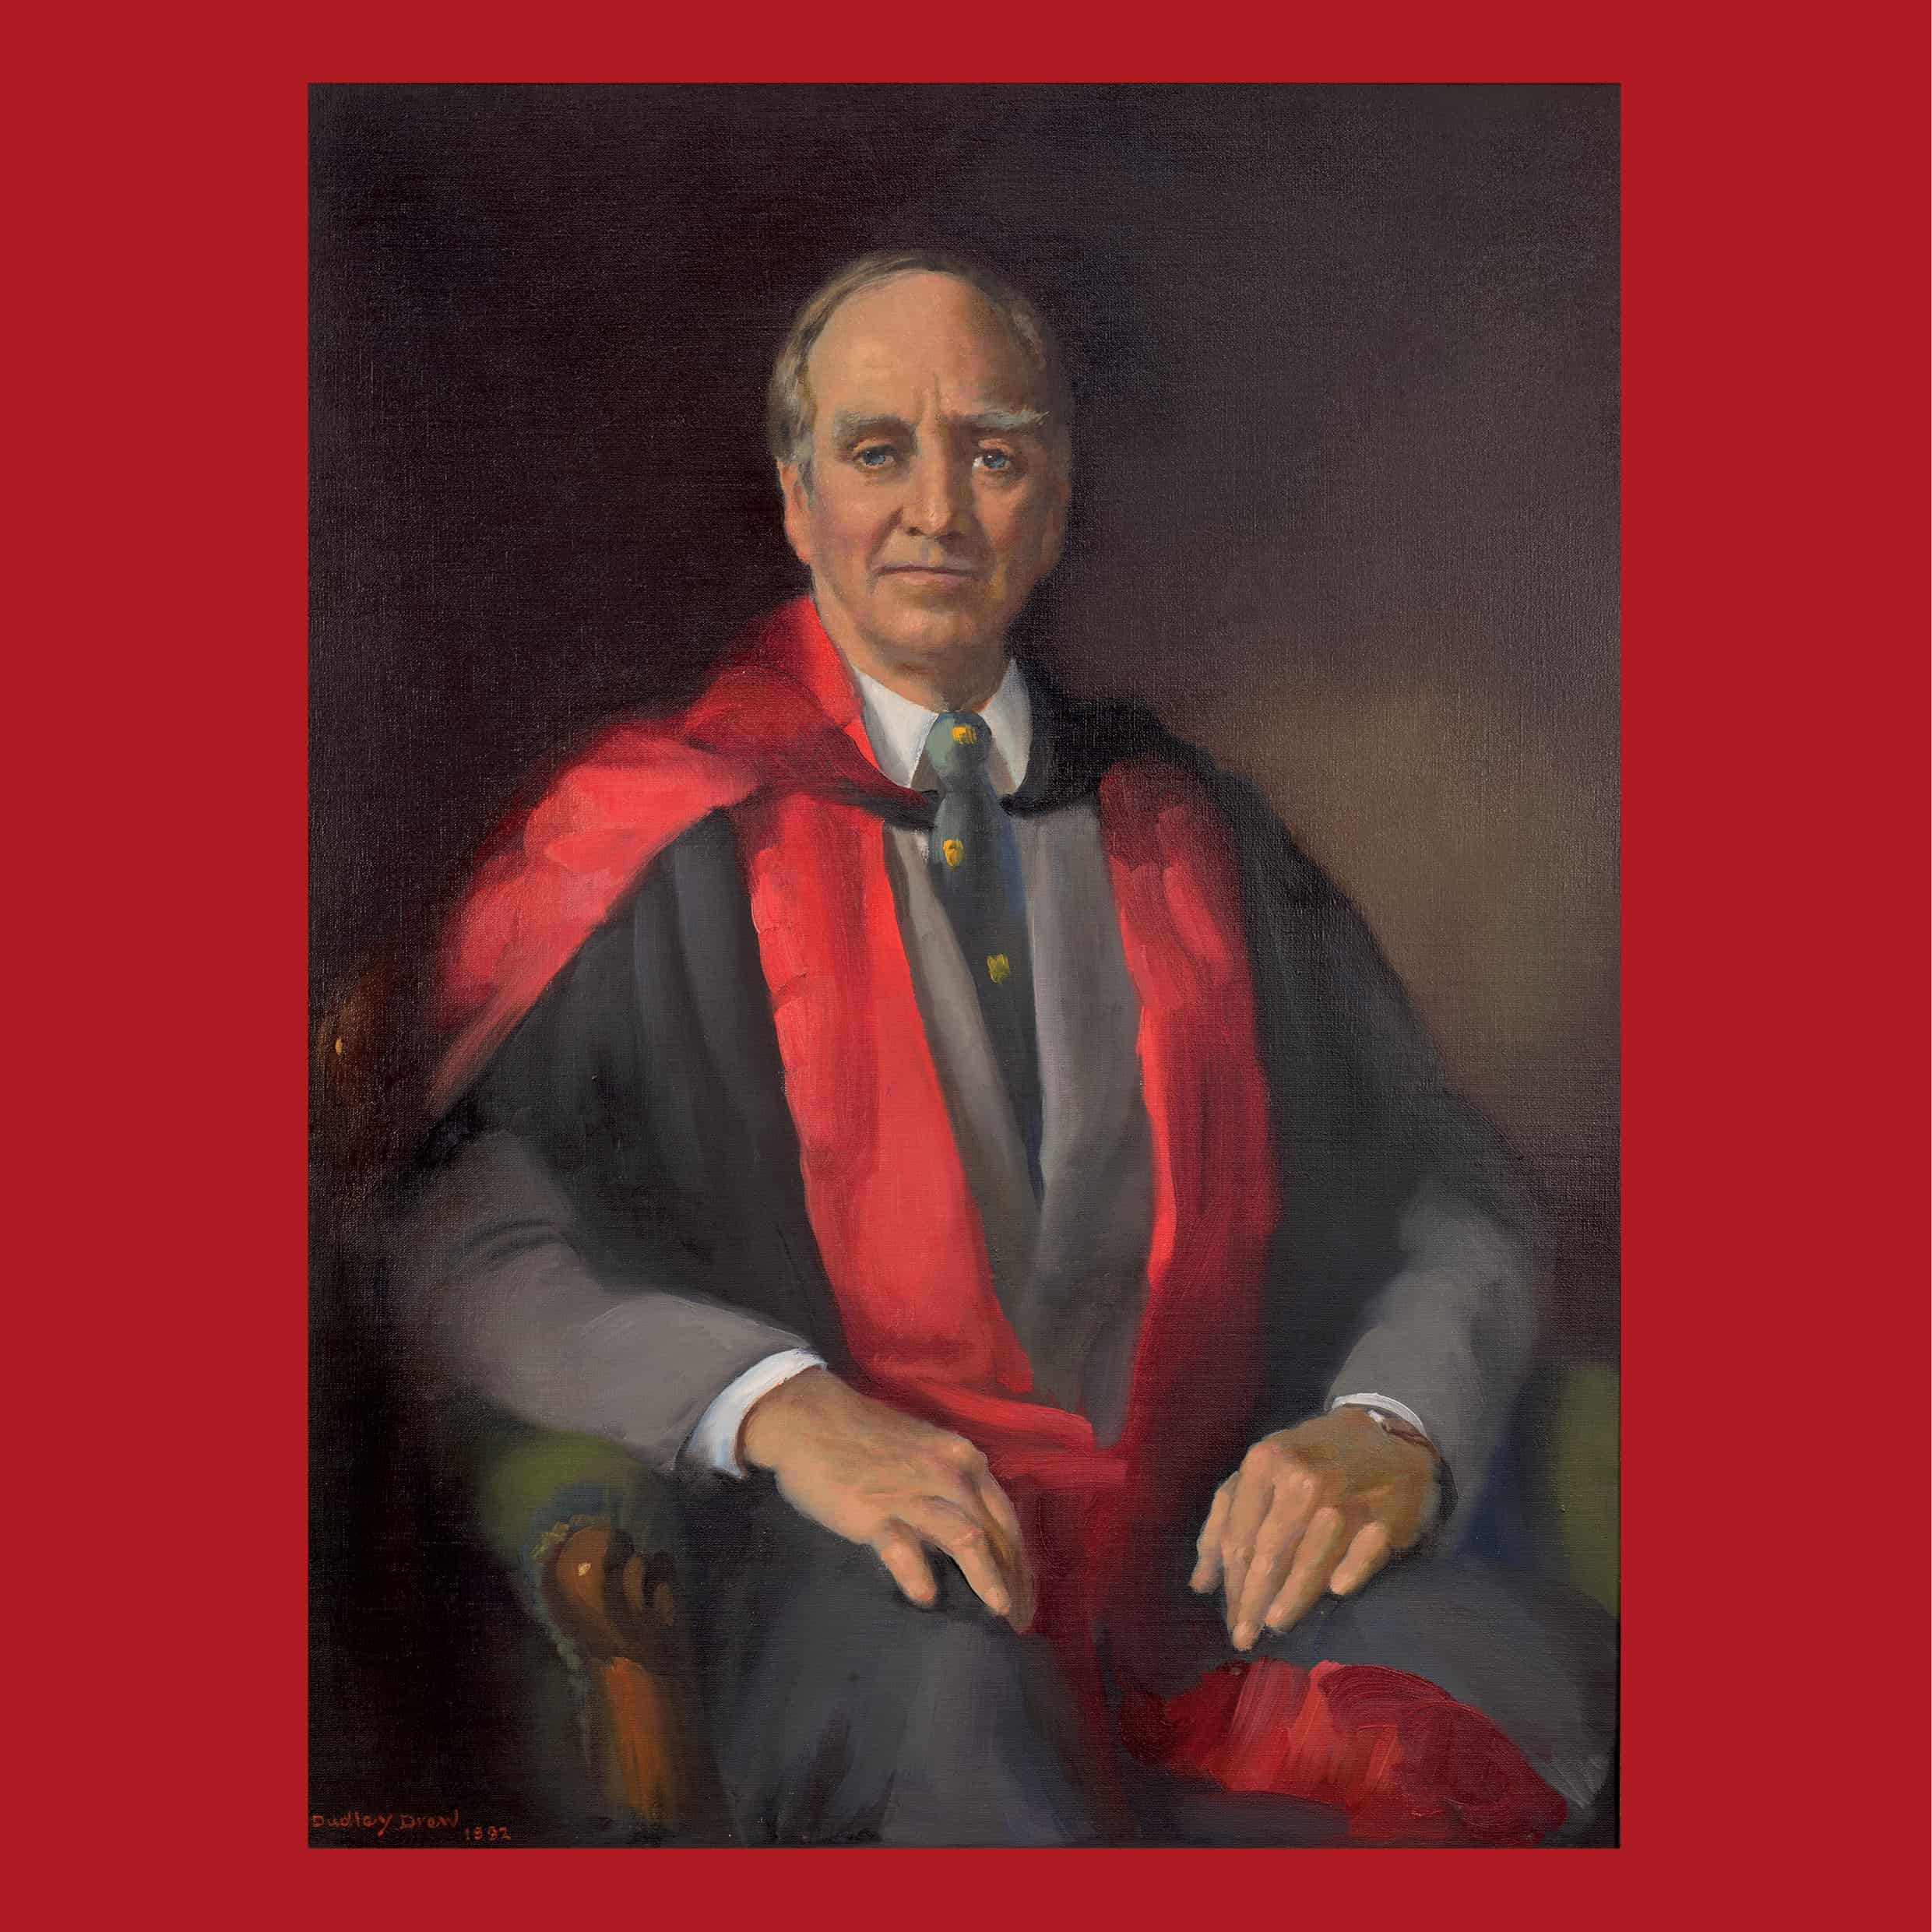  Dudley Drew (Australian, 1924–2015), Professor Emeritus Peter Clarence Reade, 1992, oil on canvas, image 99.4 × 74.3 cm. 1992.0029, commissioned by the School of Dental Science 1992, University of Melbourne Art Collection. 